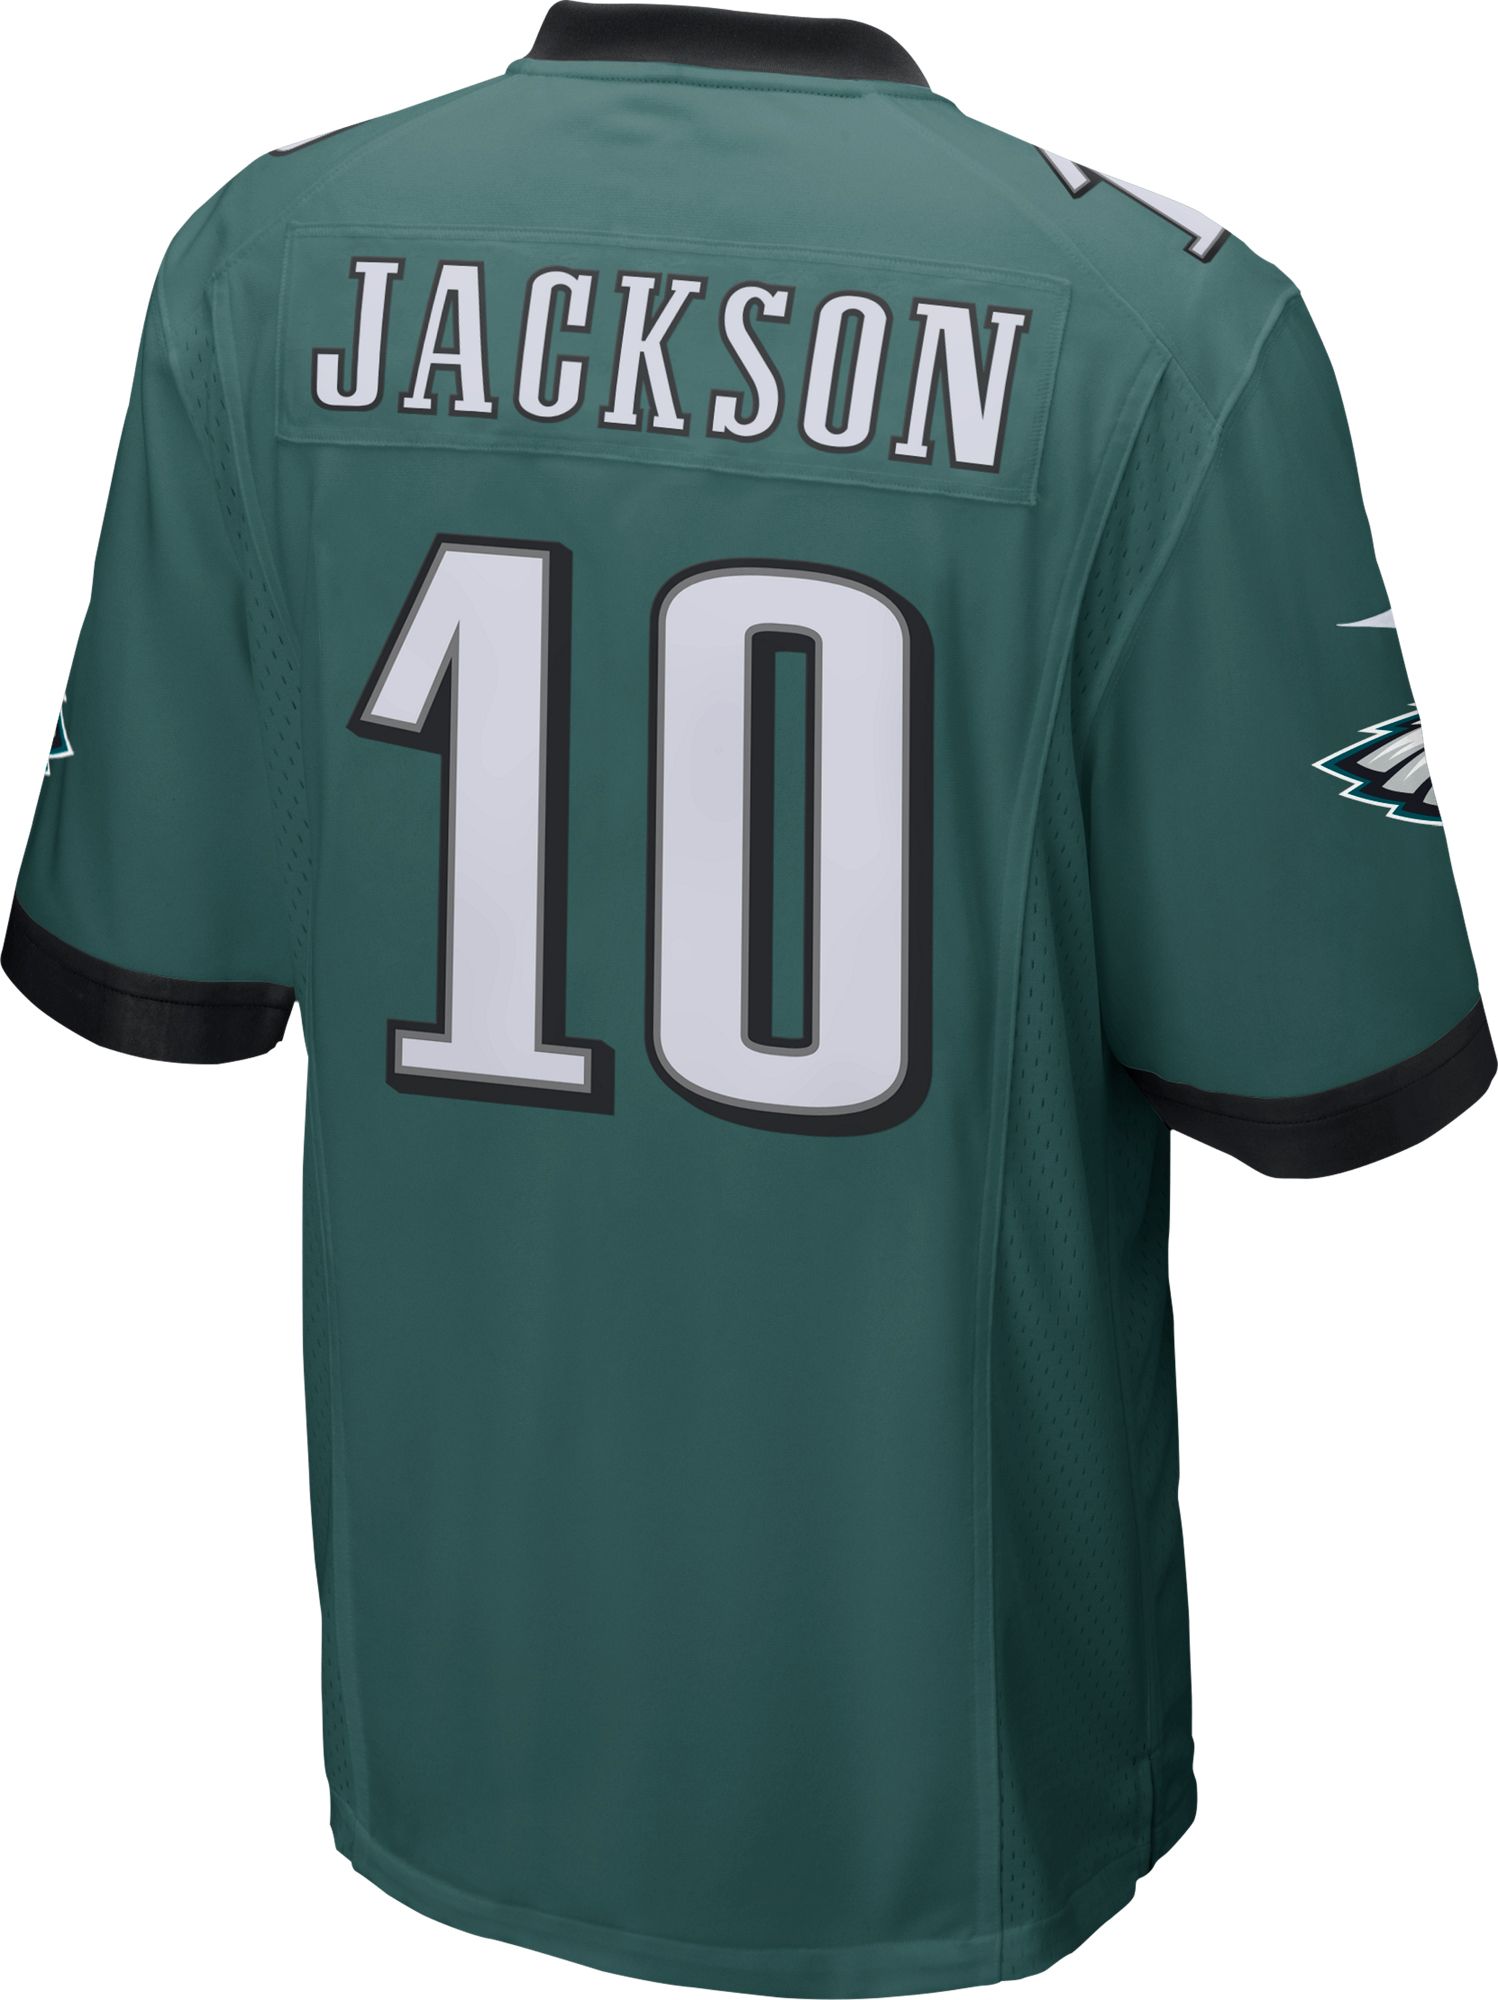 eagles 10 jersey